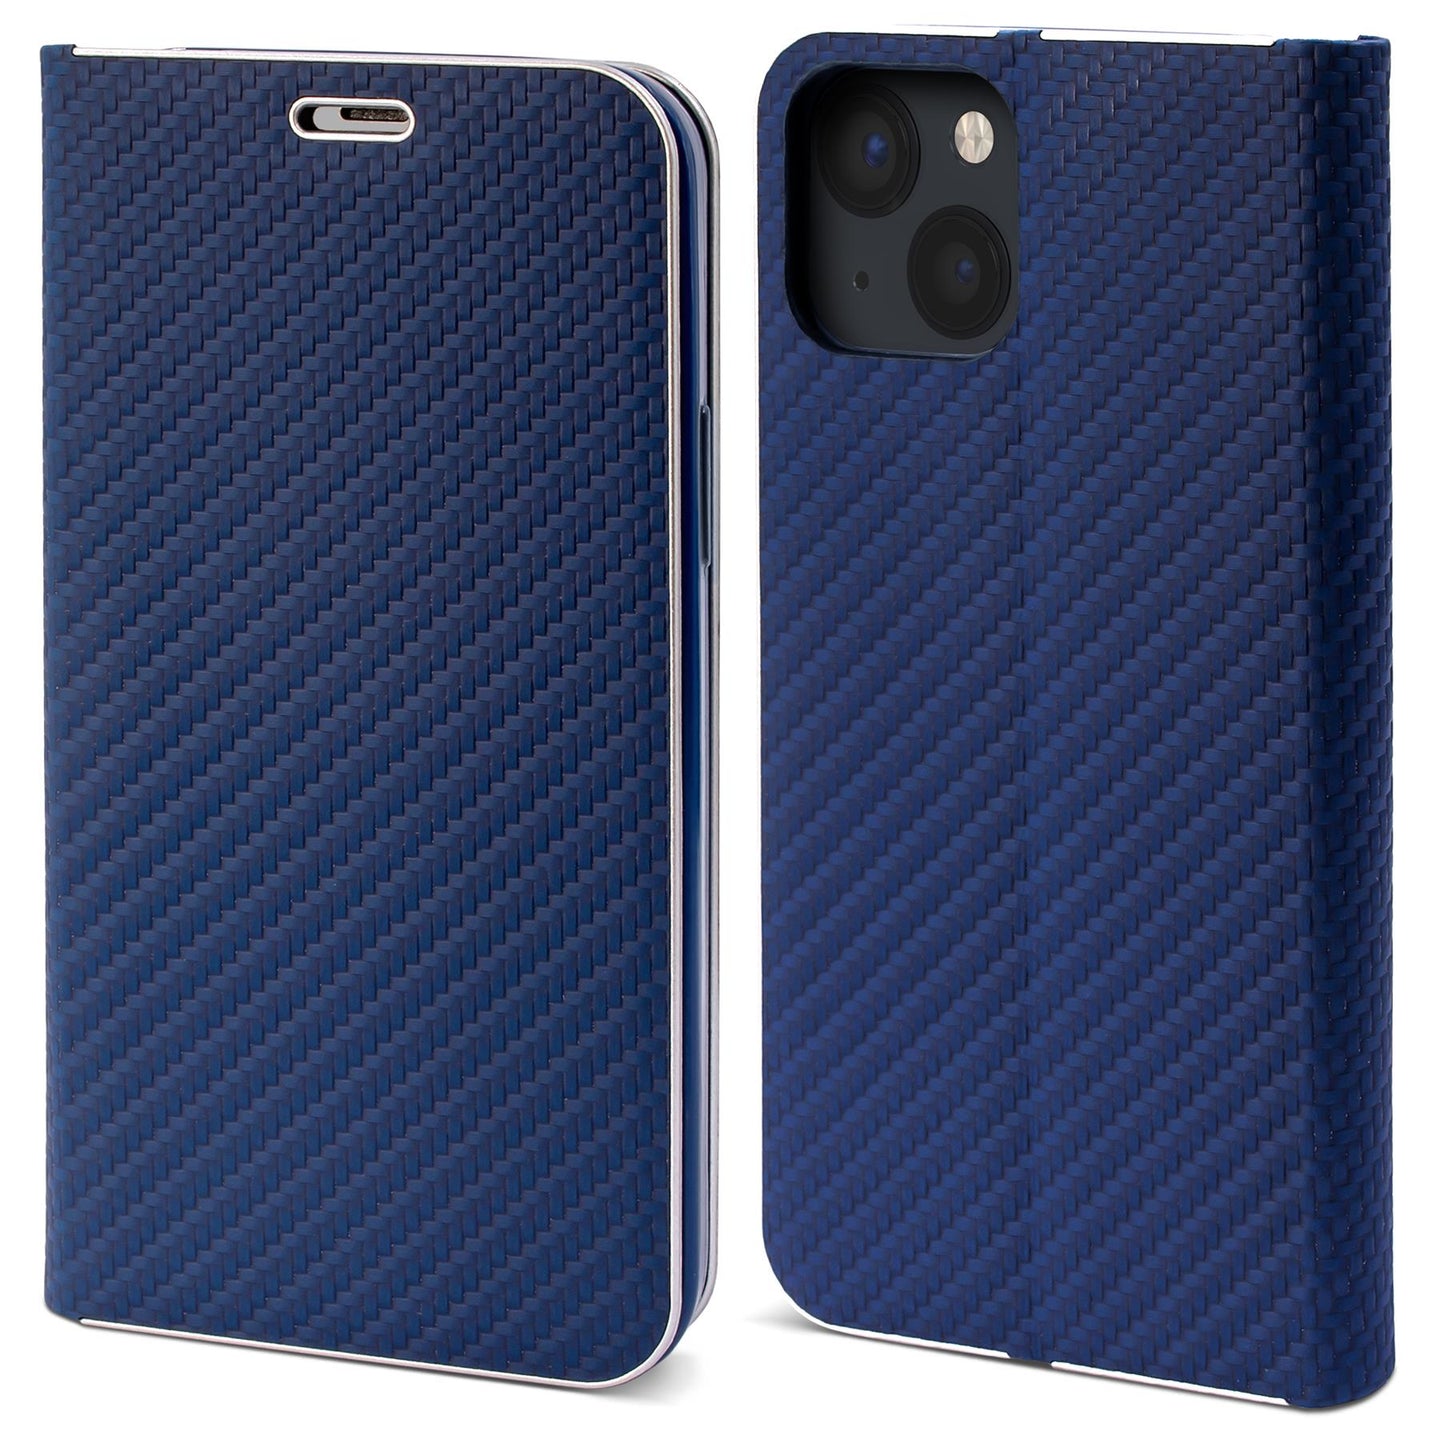 Moozy Wallet Case for iPhone 13, Dark Blue Carbon – Flip Case with Metallic Border Design Magnetic Closure Flip Cover with Card Holder